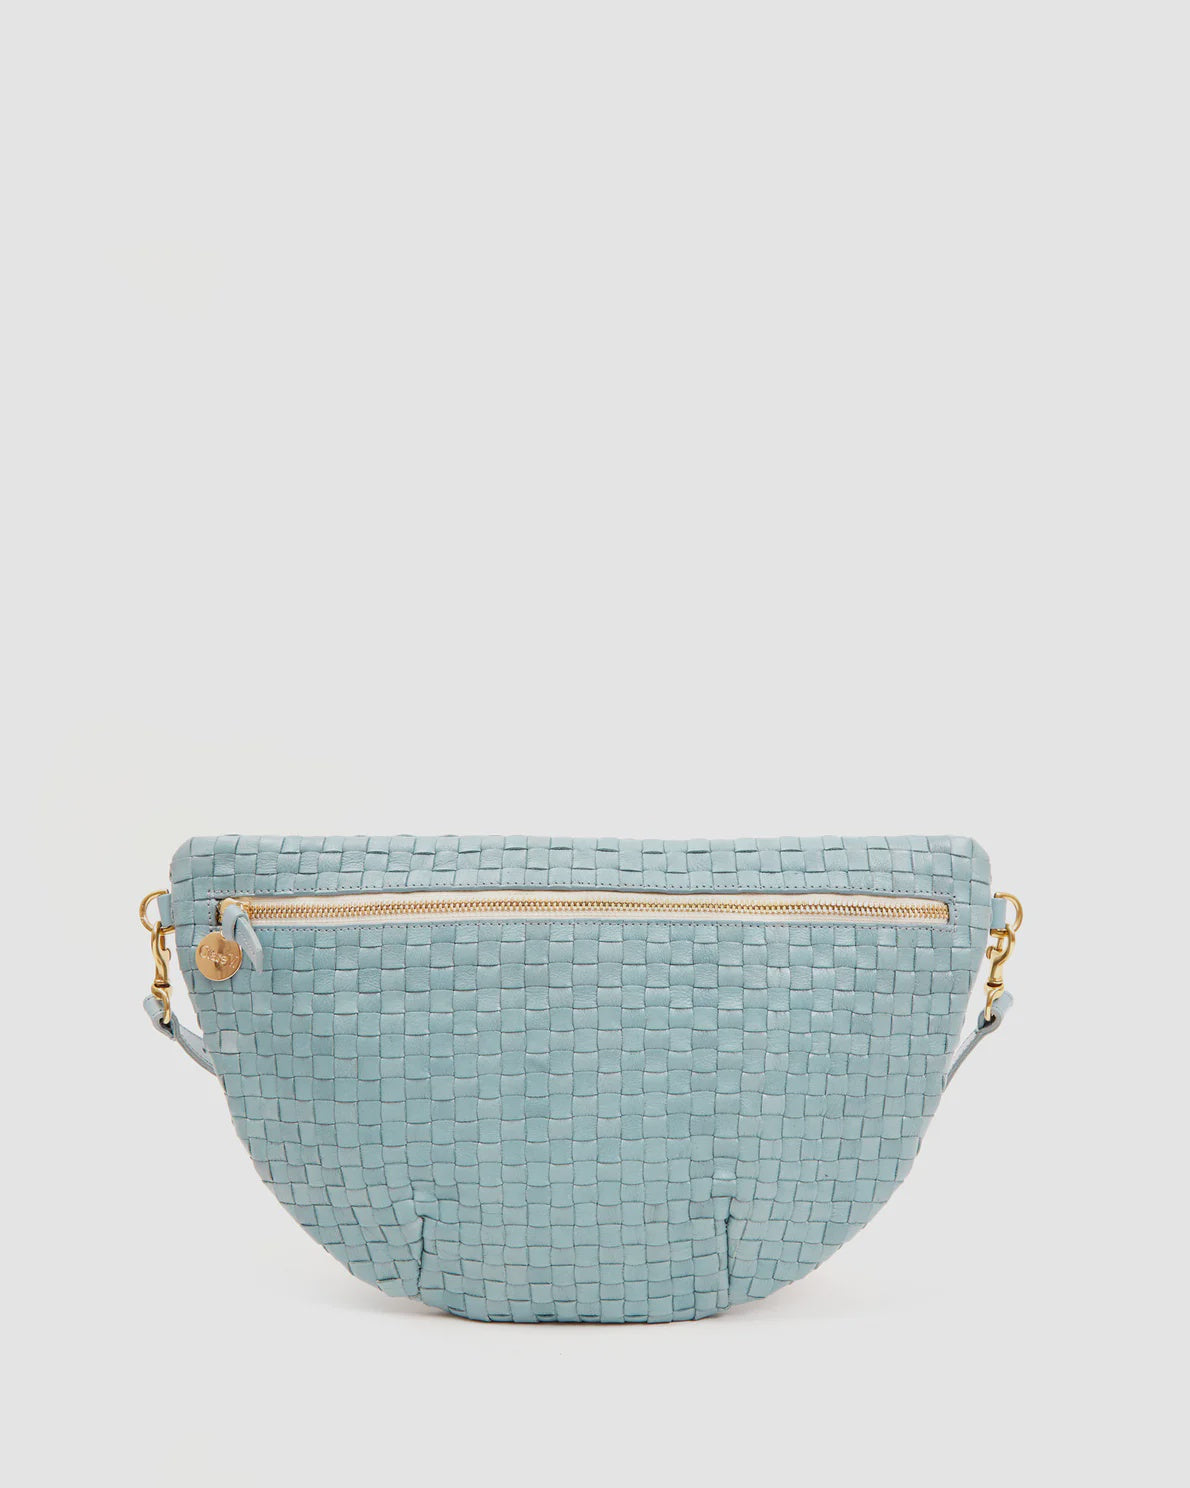 A light blue Grande Fanny Woven Checker bum bag with gold-toned hardware on a white background by Clare Vivier.